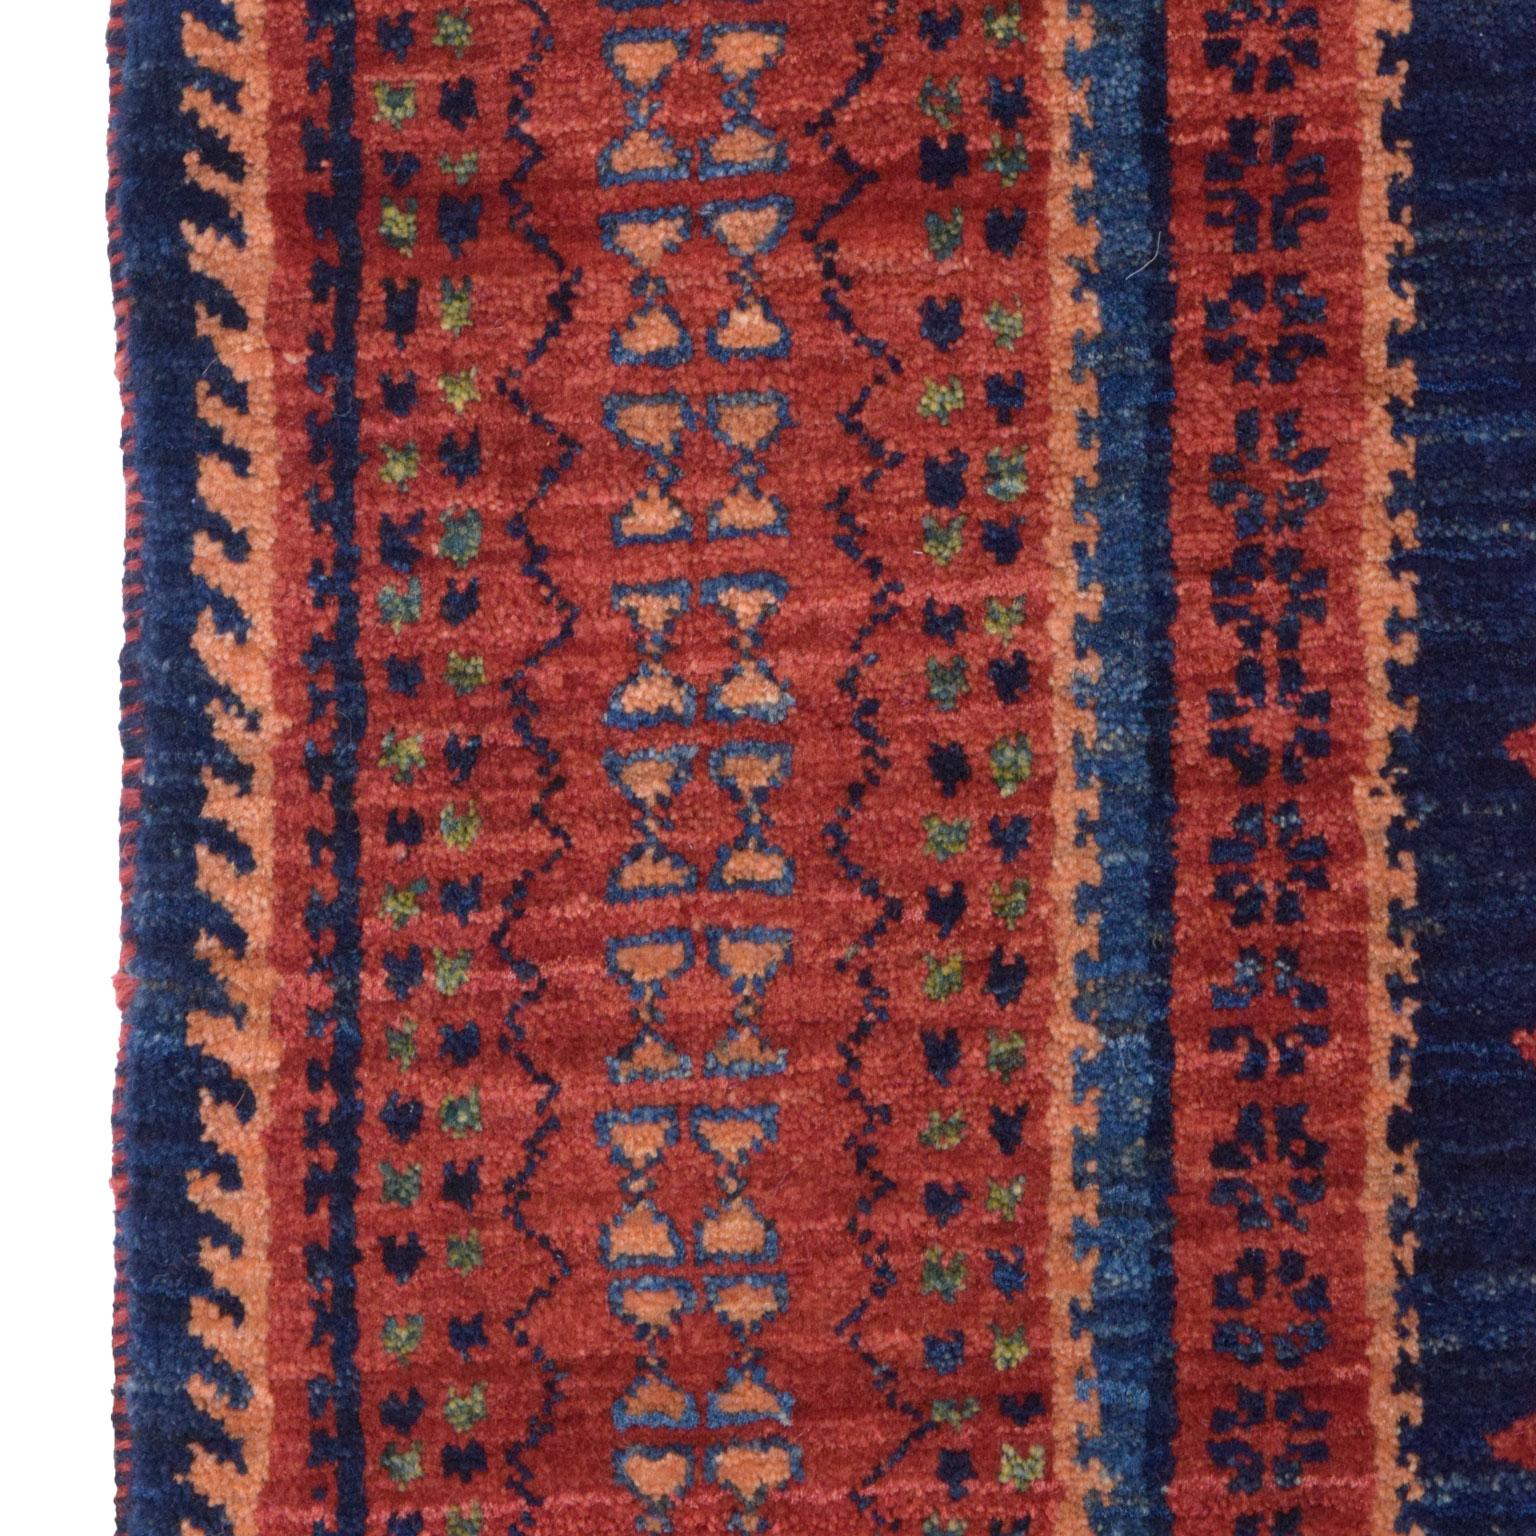 Hand-Knotted Wool Persian Qashqai Tribal Rug, Red, Green, Indigo, Cream, 4’ x 6’ For Sale 2